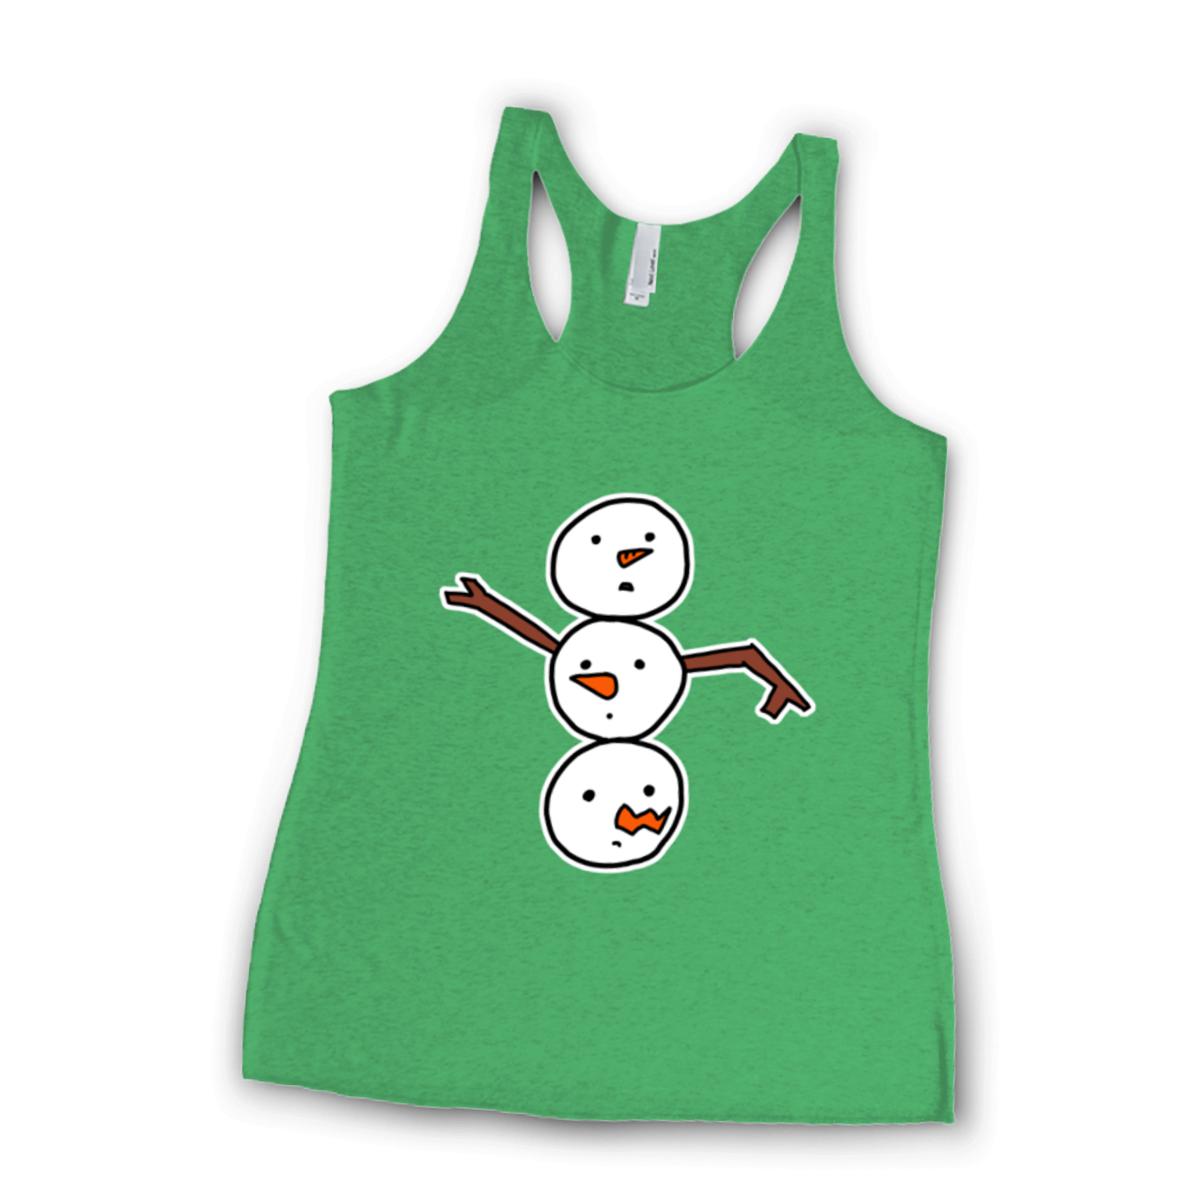 Snowman All Heads Ladies' Racerback Tank Extra Small envy-green